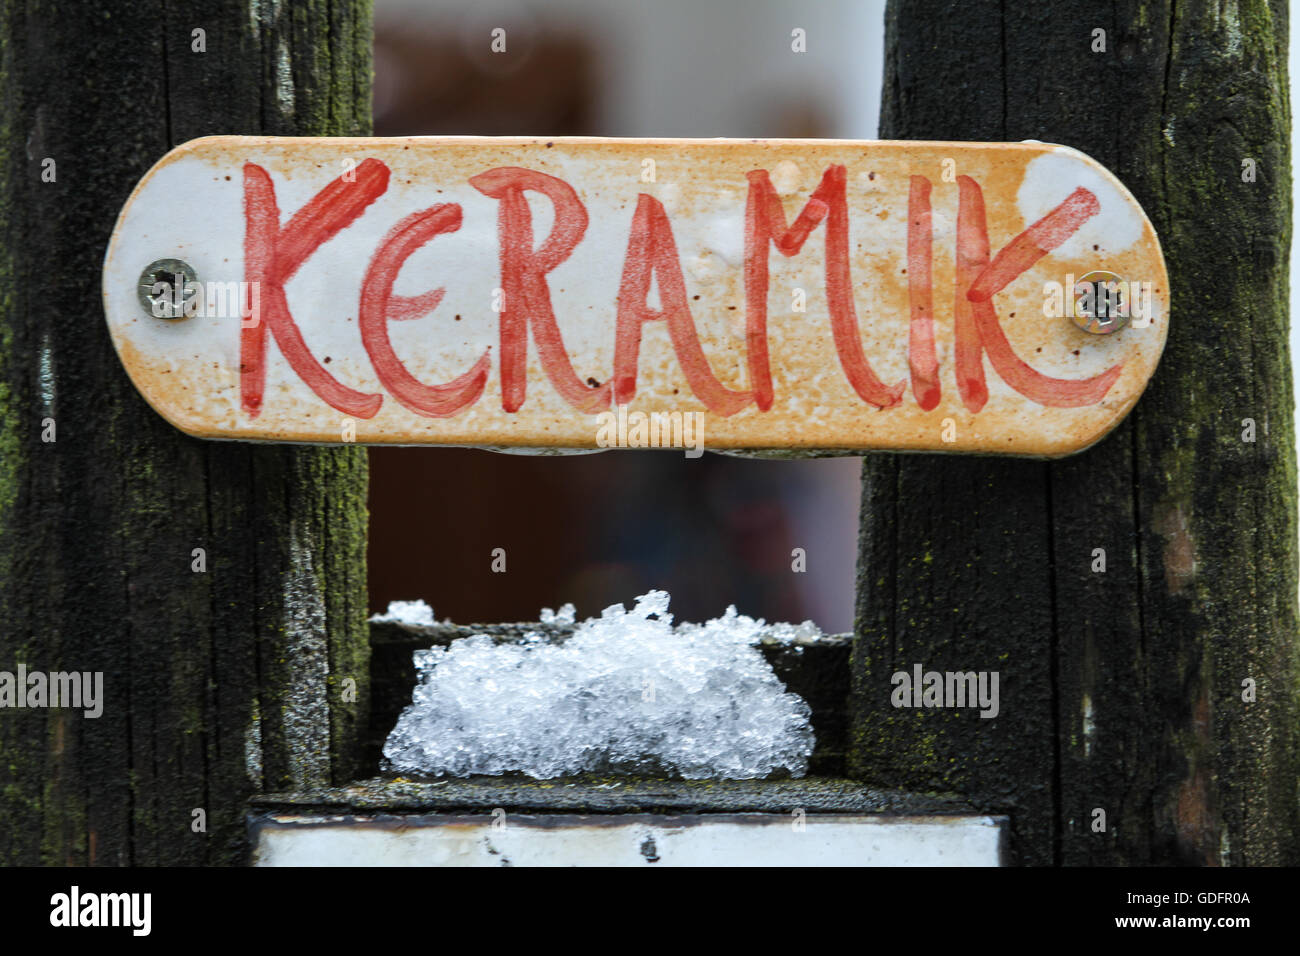 KERAMIK German word for ceramic on signboard label at a show workshop Stock Photo